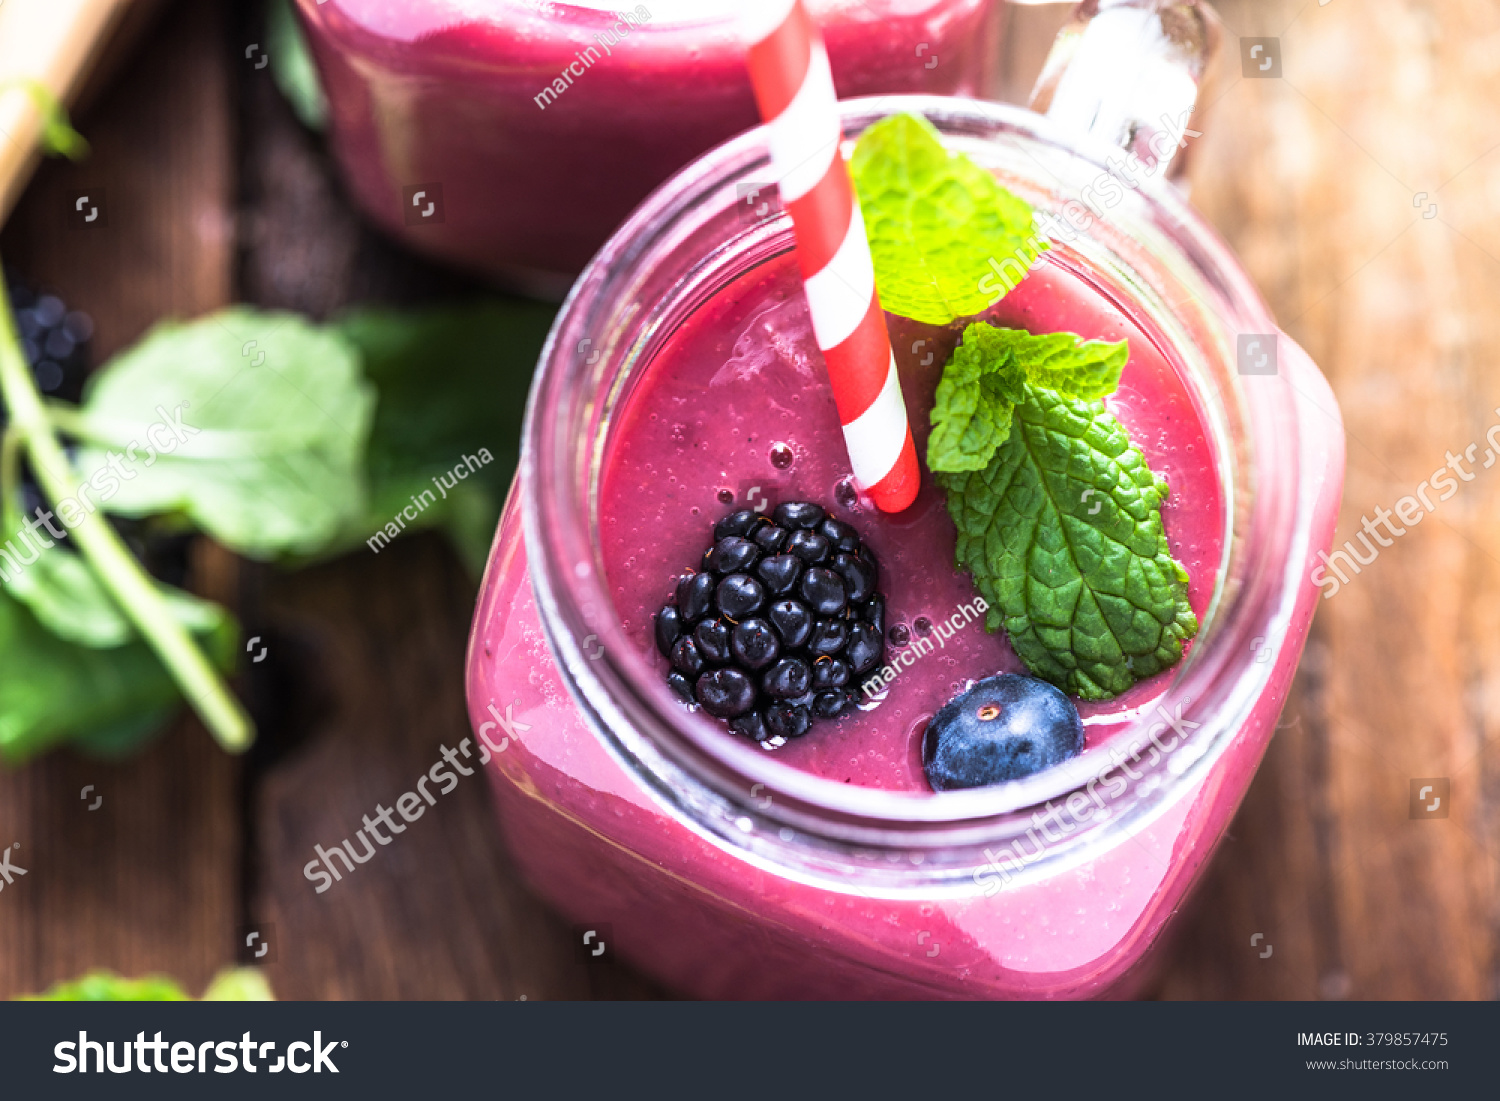 Well being and weight loss concept, berry smoothie.On wooden table with ingredients, from above. #379857475